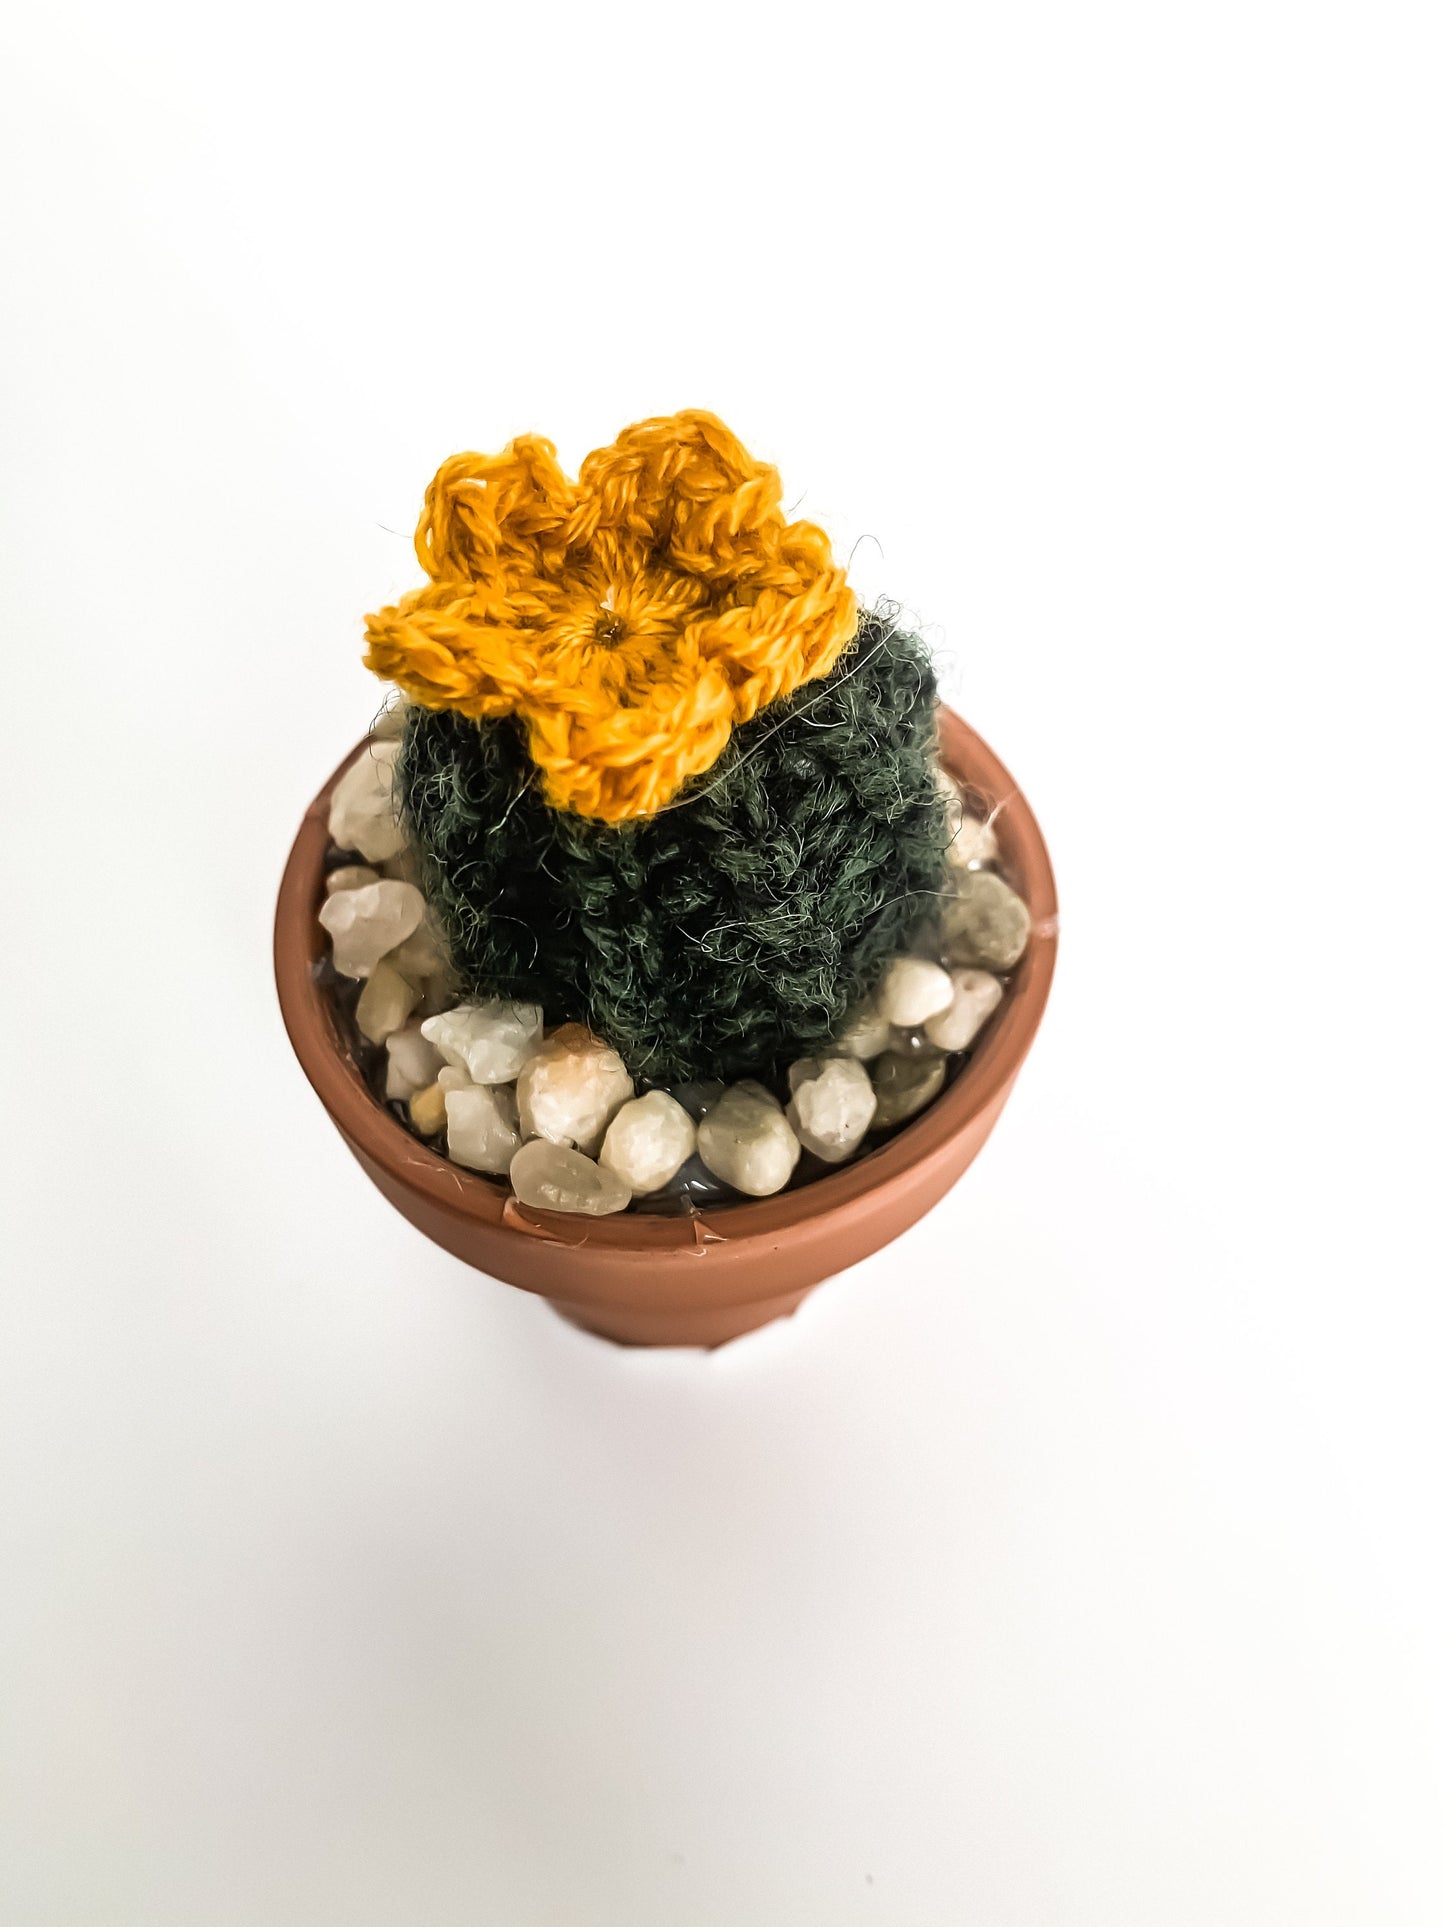 Knit Cactus // Barrel Cactus, Knit Cactus Plant with Yellow Flower Planted in Mini Terracotta Pot // Boho Home Decor // Home Office Decor